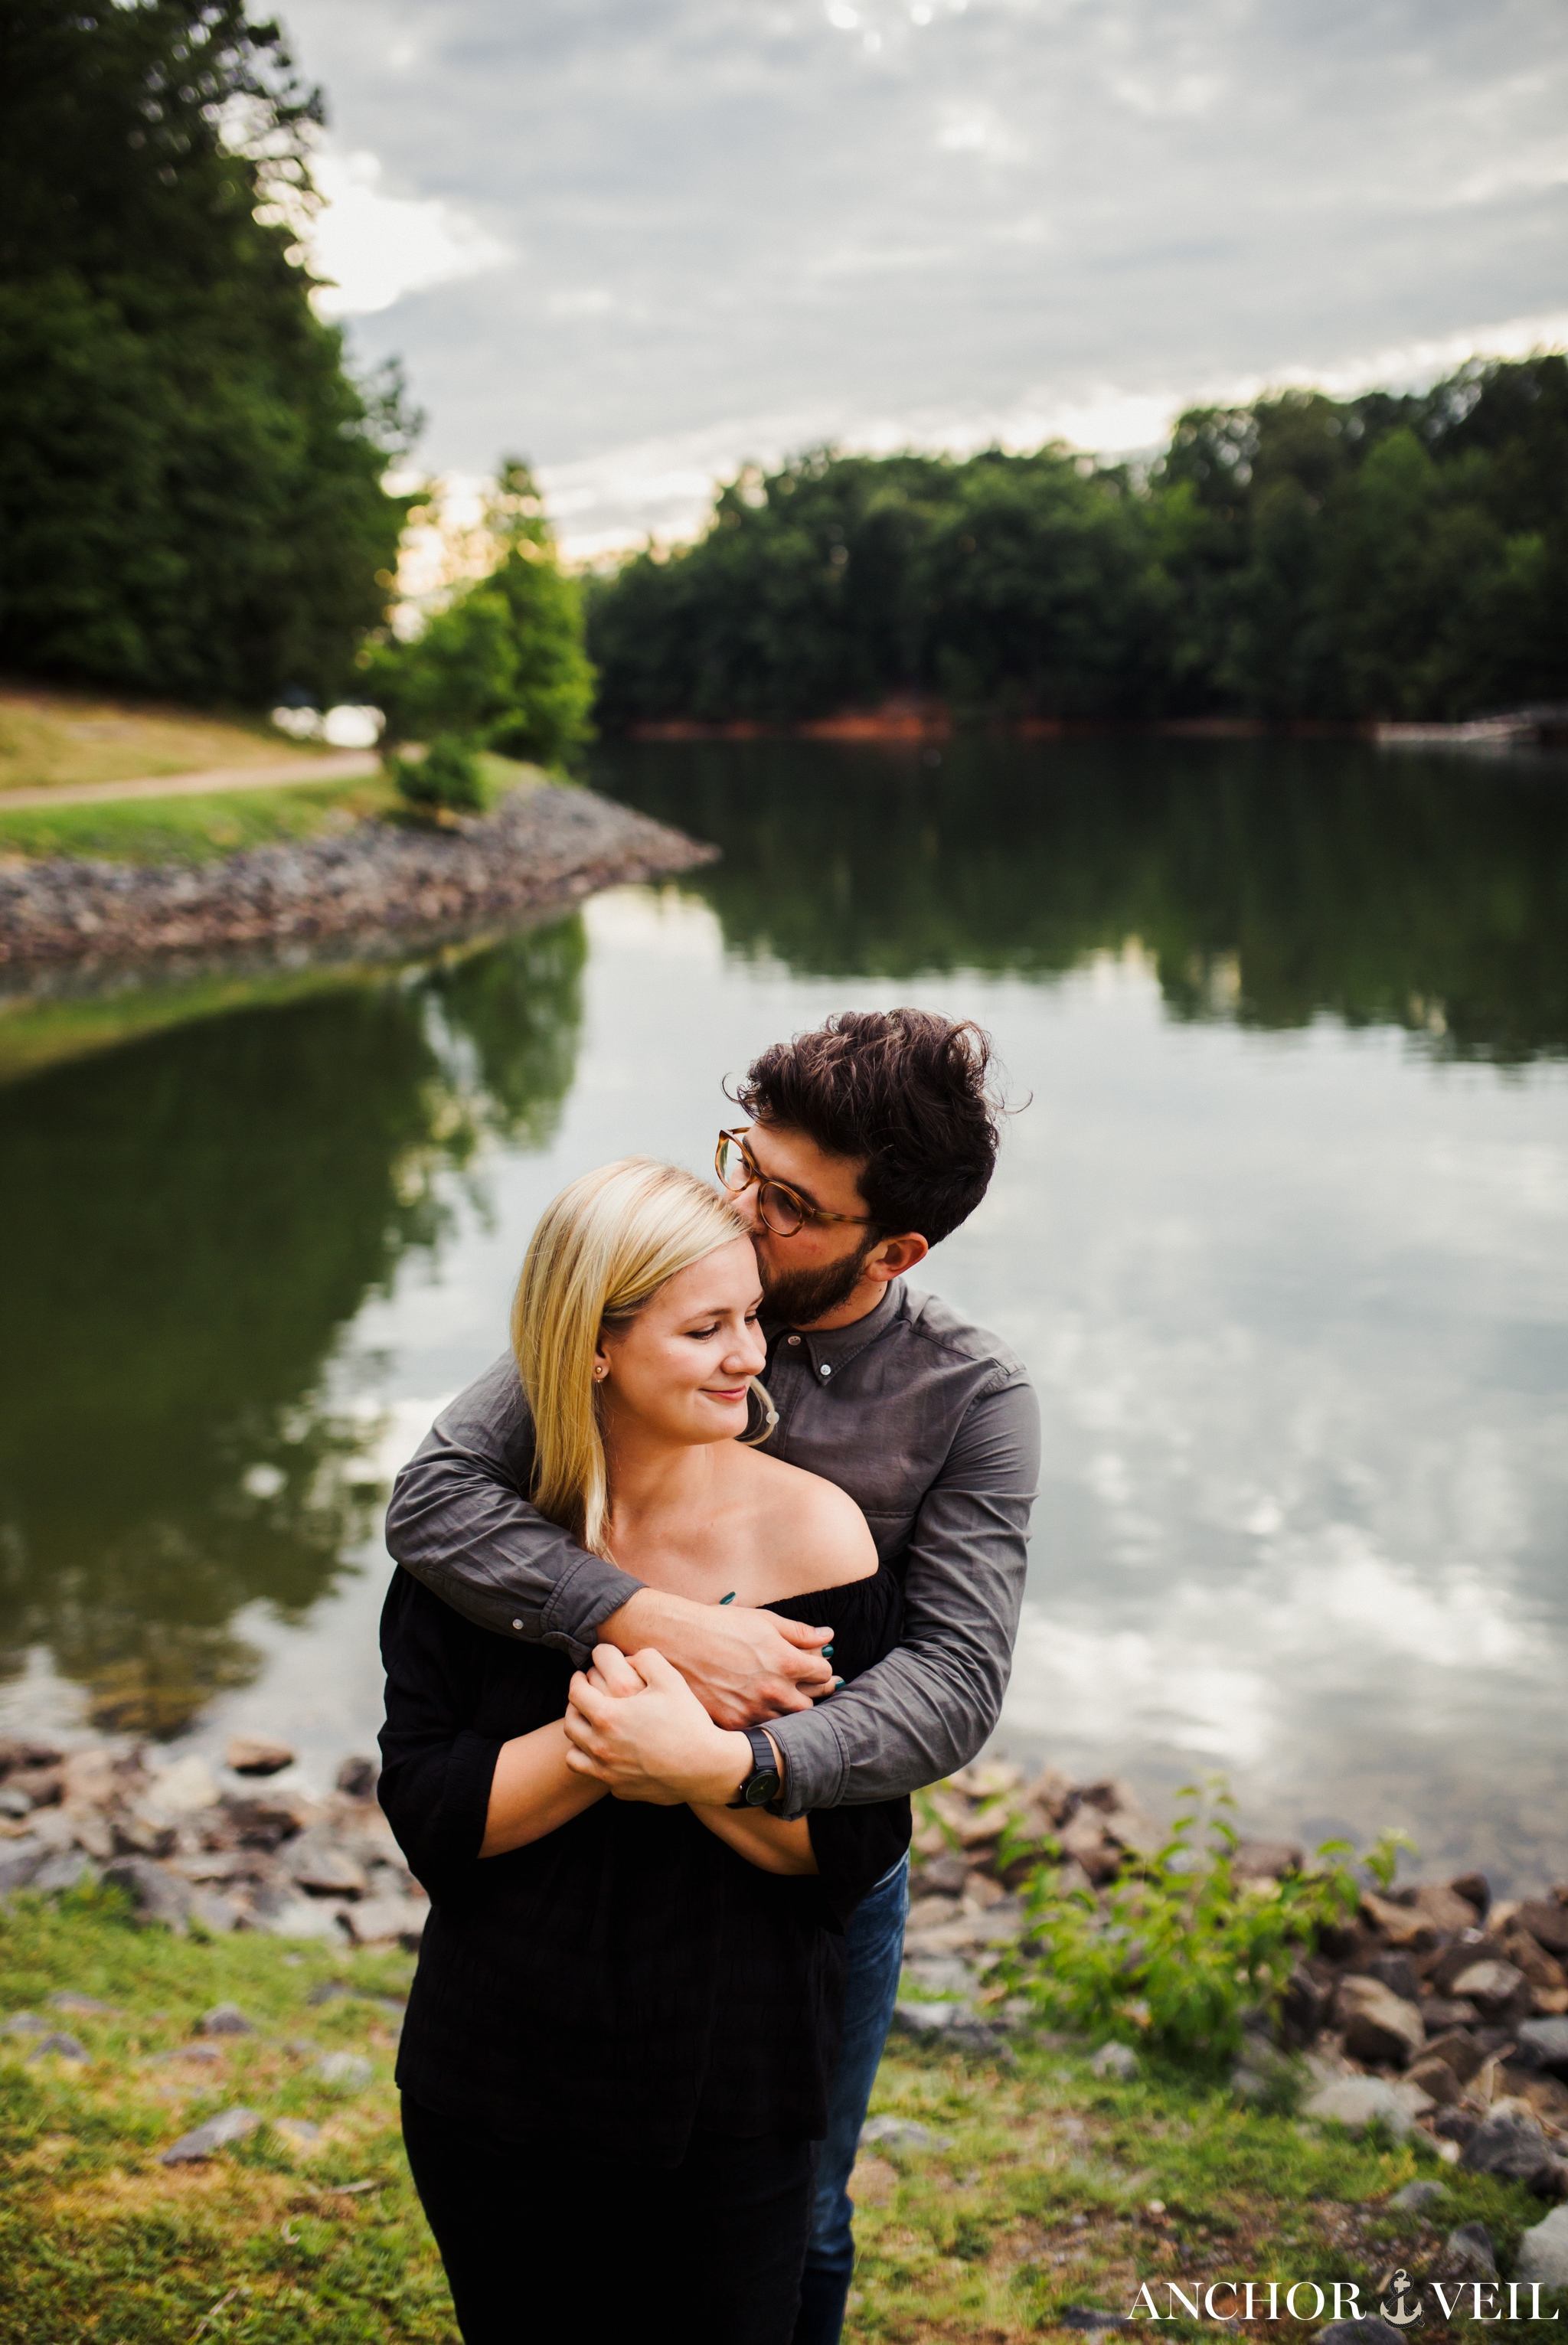 Holding her in front of the water with he light around them during their McDowell Nature Preserve Engagement Session